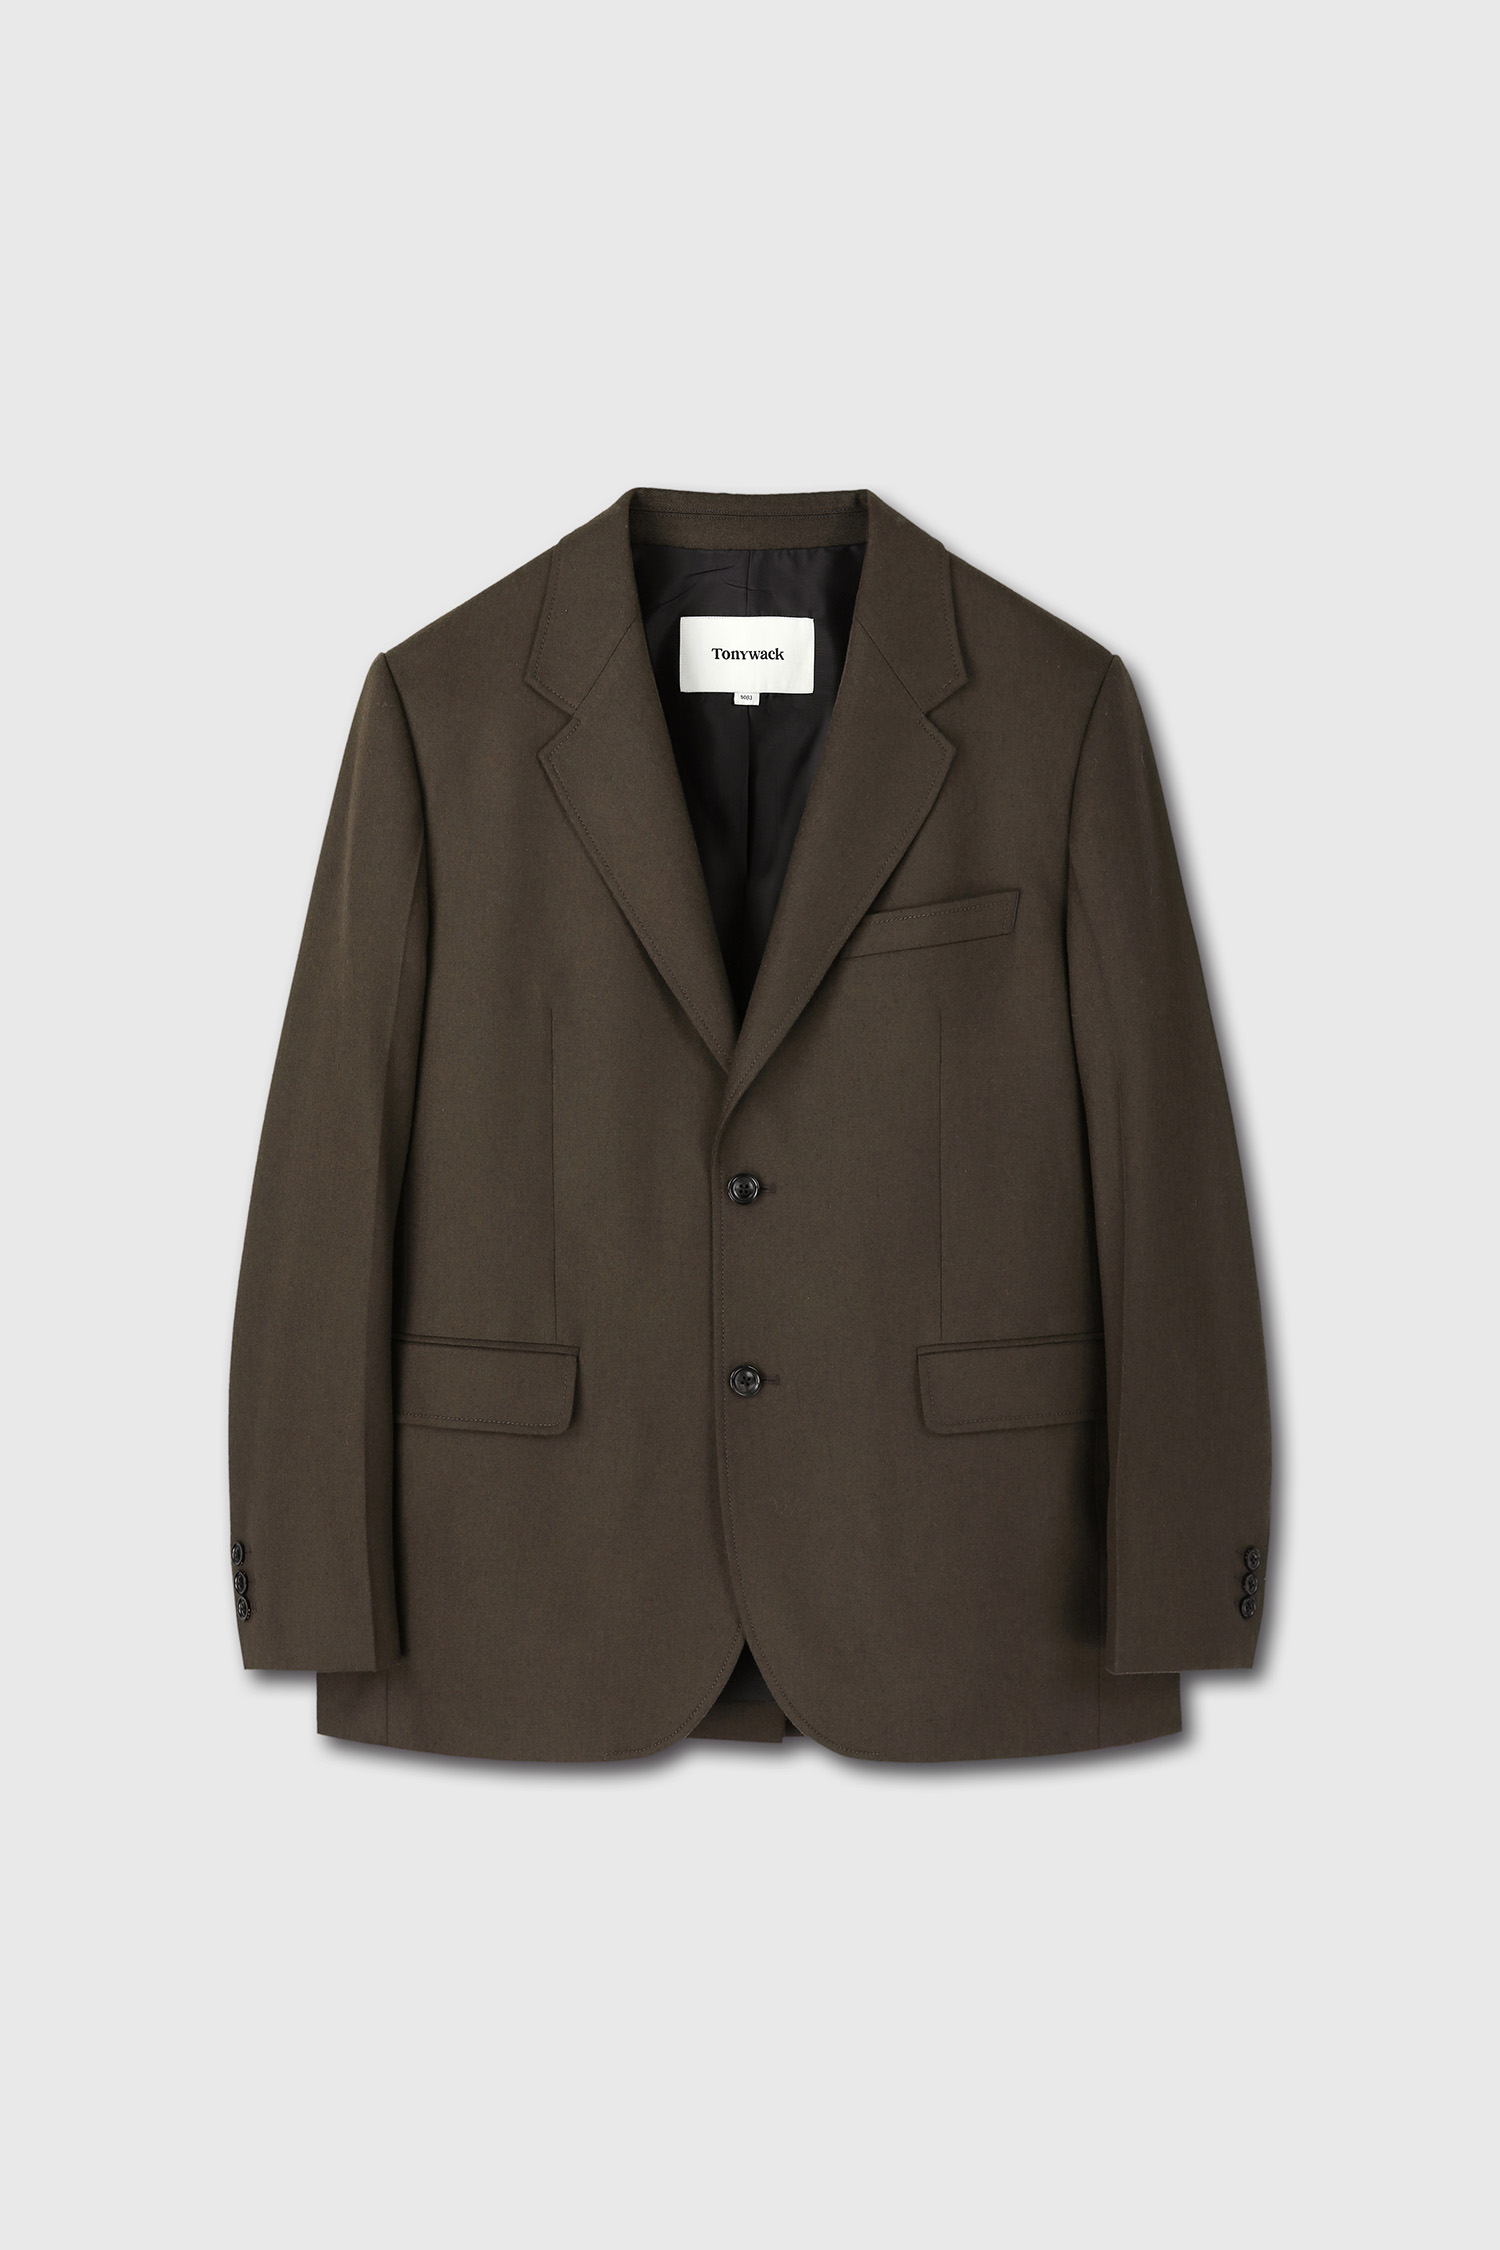 WOOL AND CASHMERE TAILORED BLAZER taupe brown